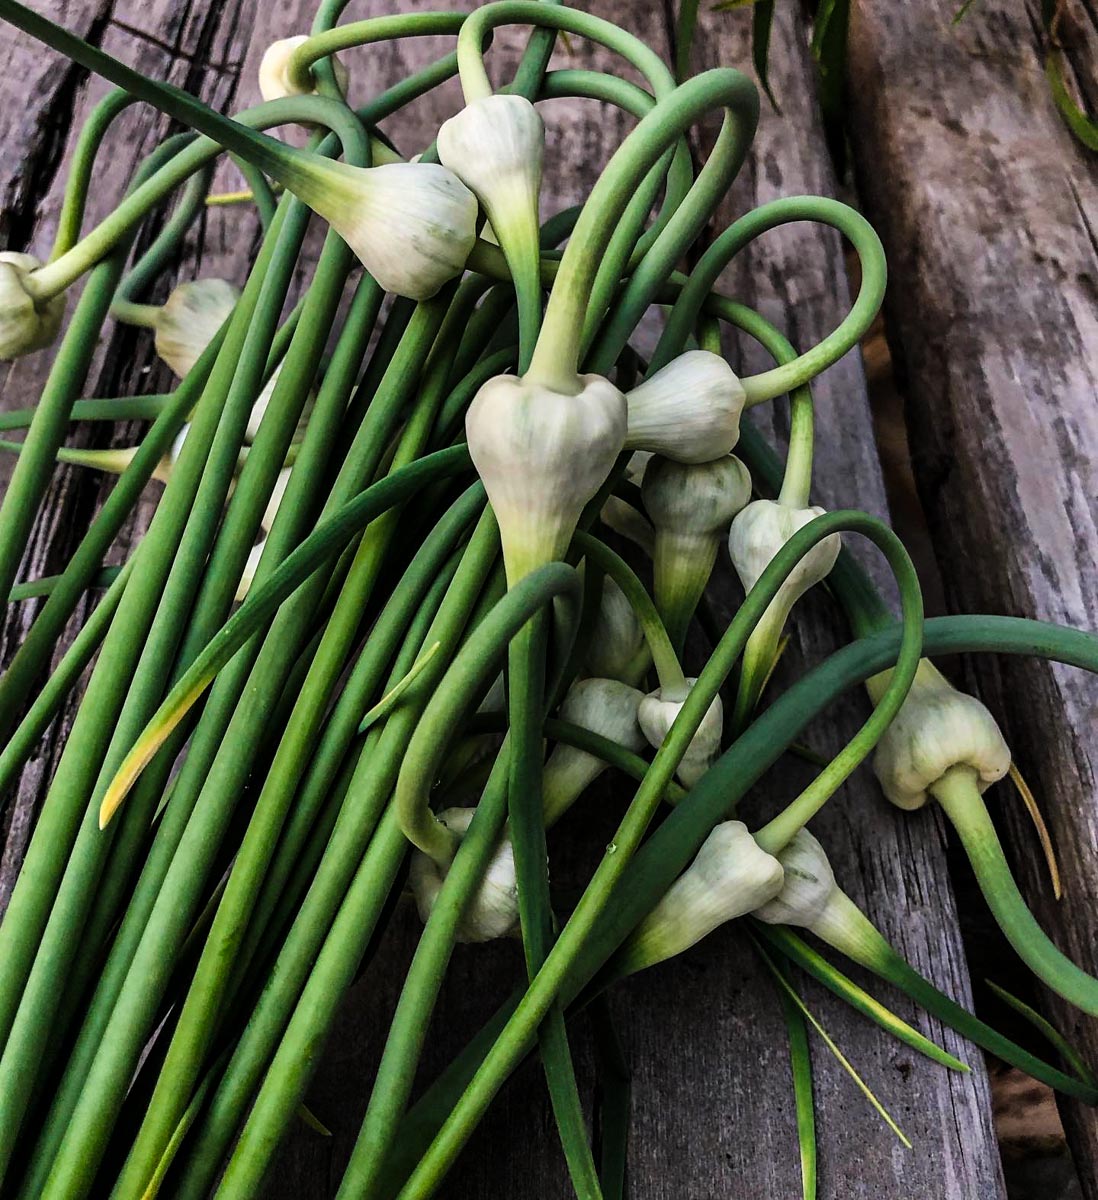 Freshly harvested garlic scapes on wooden bench